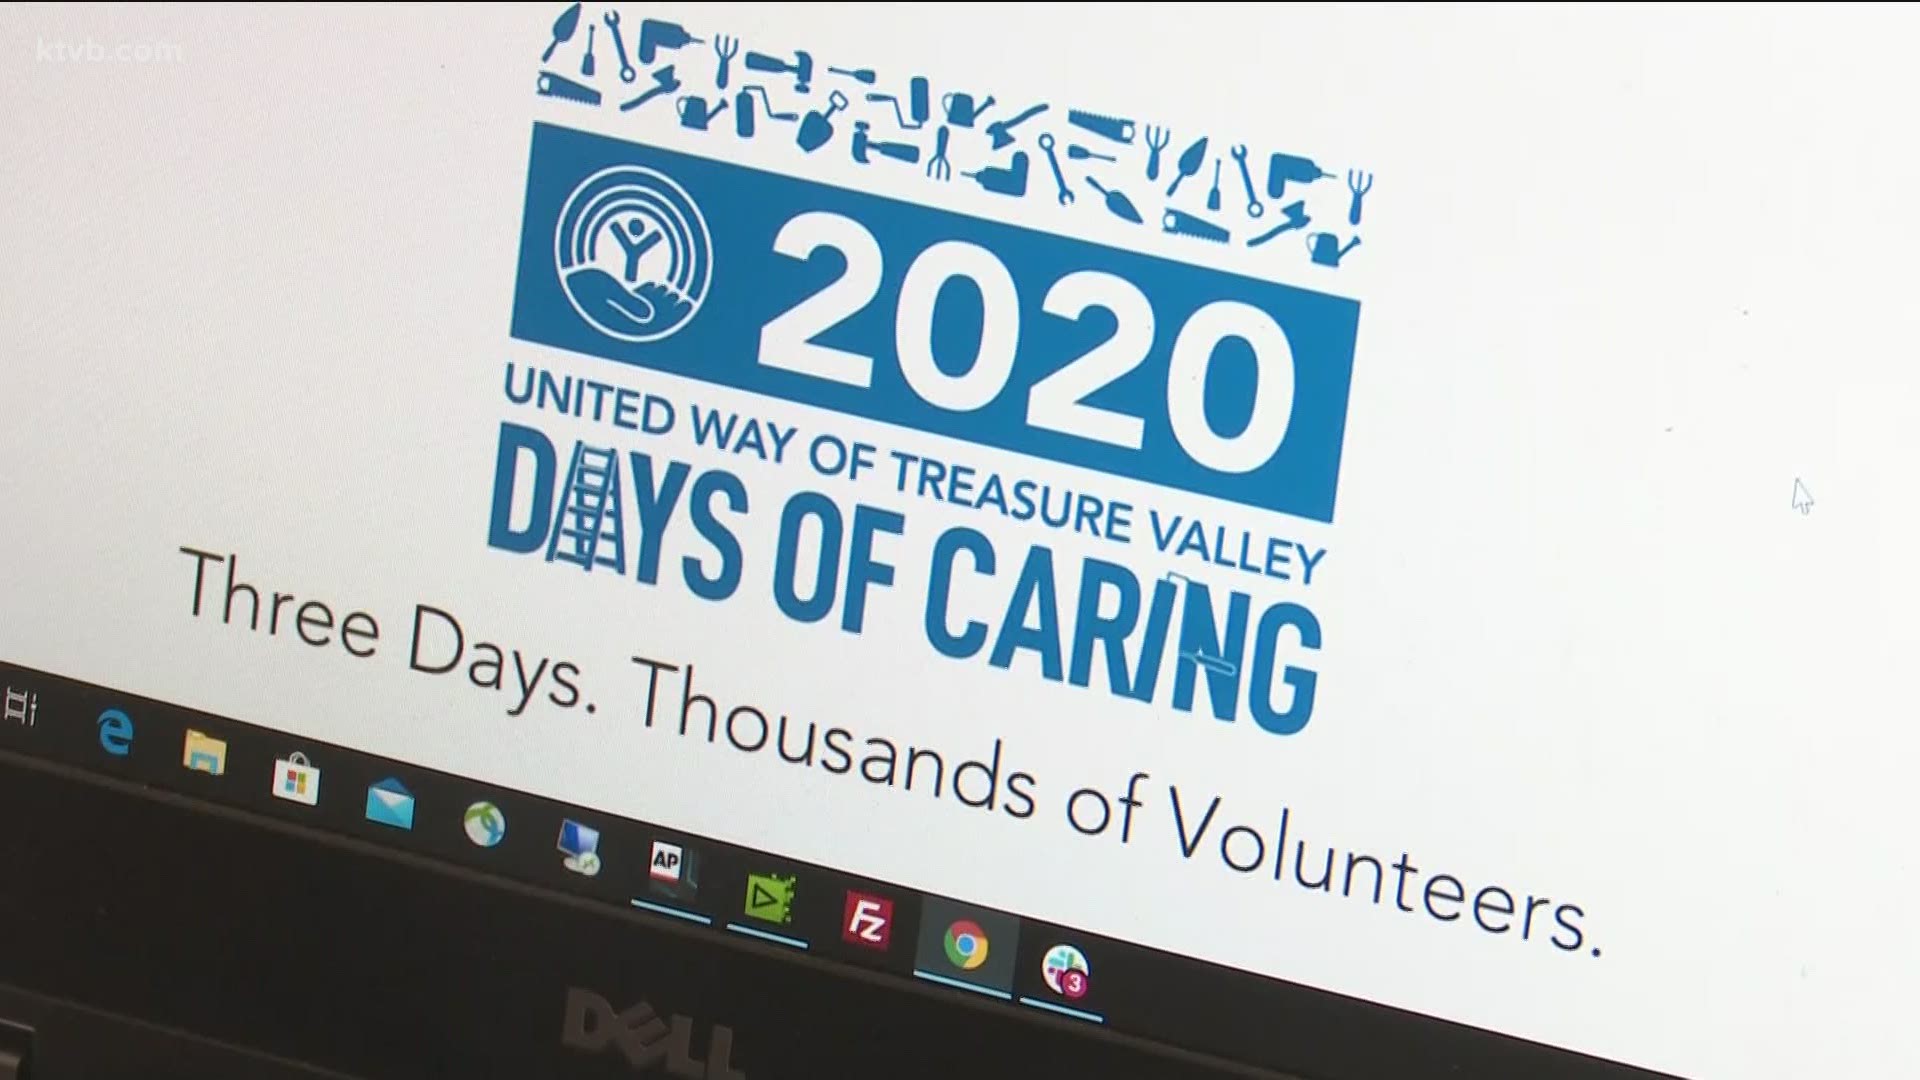 United Way said projects will range from making sack lunches for low-income children to removing goatheads on hiking or biking trails.